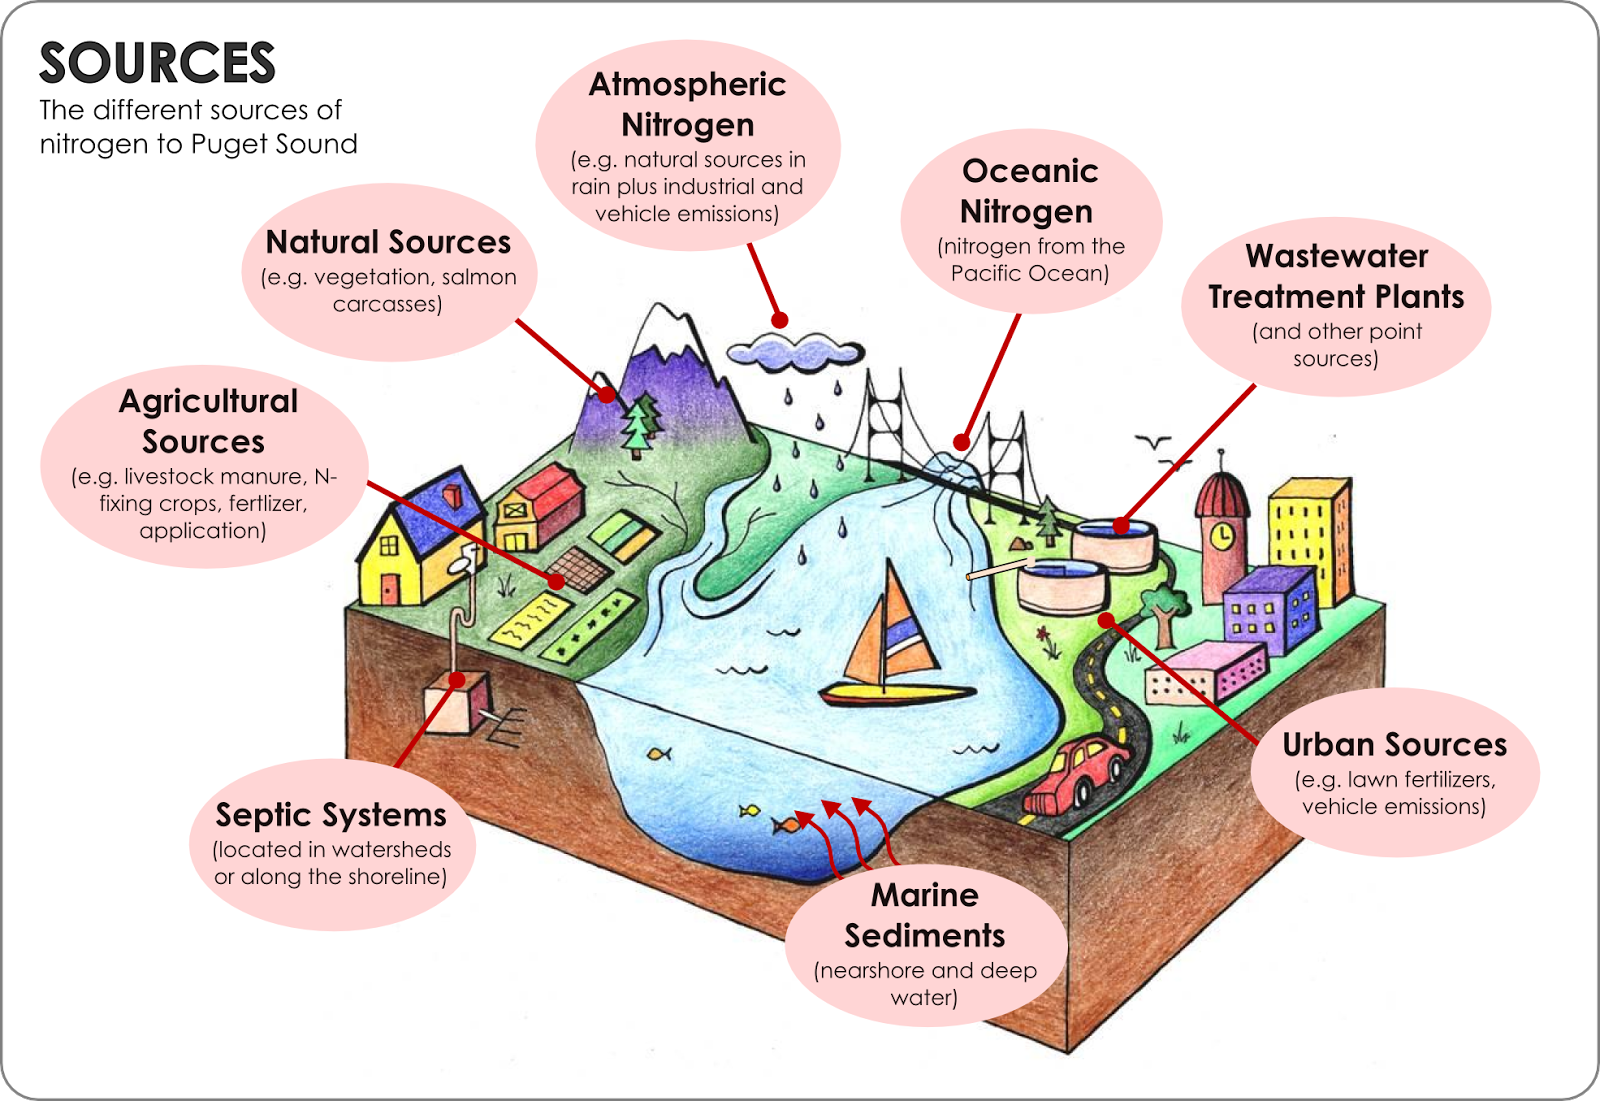 Sources illustrated: Nature, Atmosphere, the Ocean, Wastewater, Urban Sources, Marine Sediments, Septic Systems, and Agriculture.